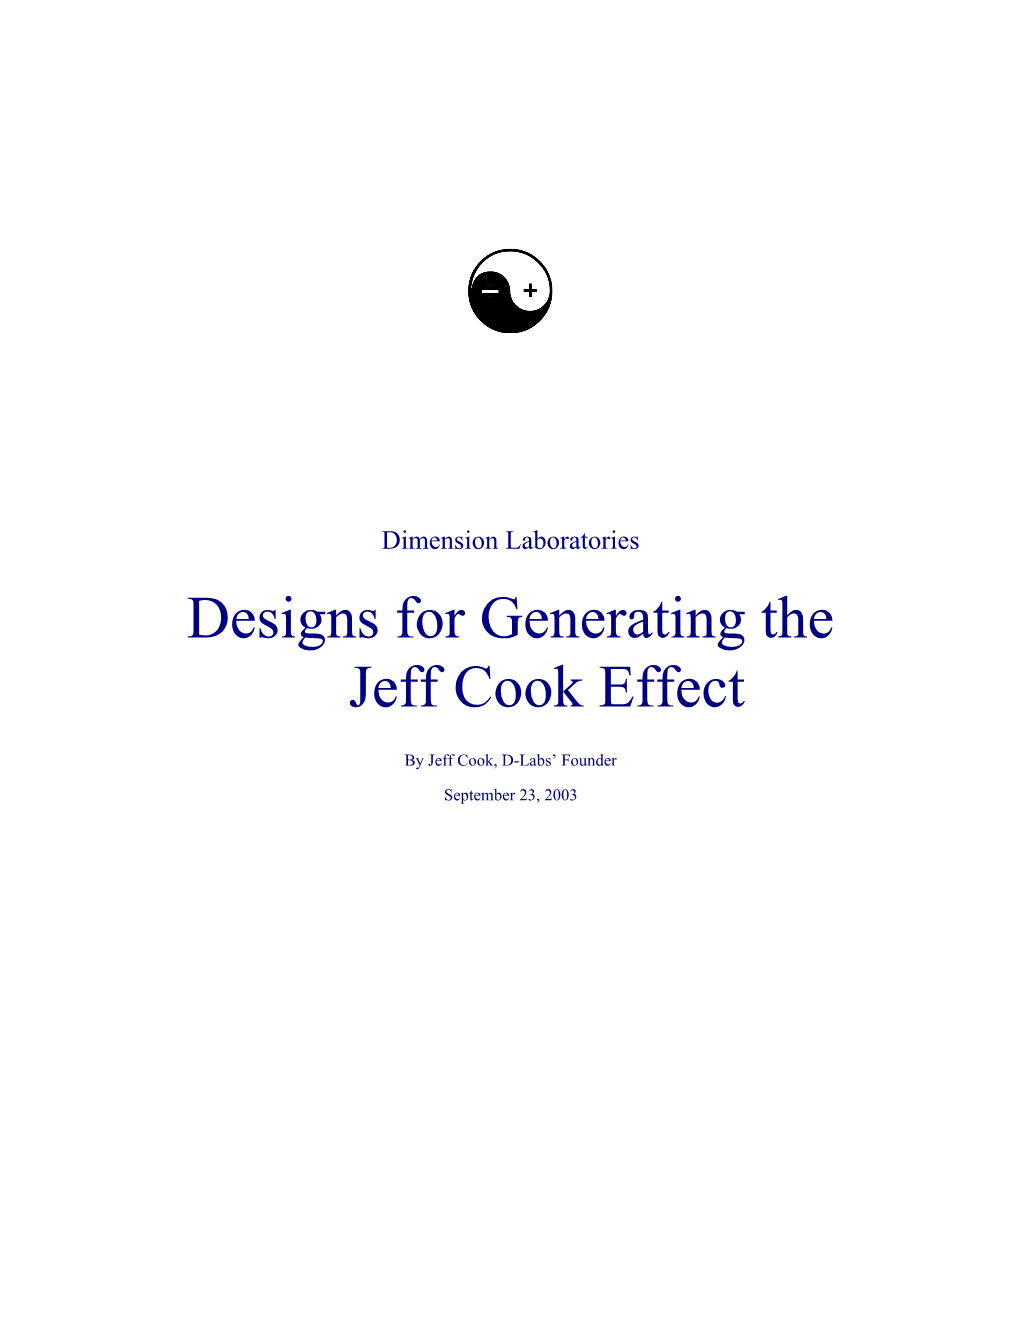 Designs for Generating the Jeff Cook Effect